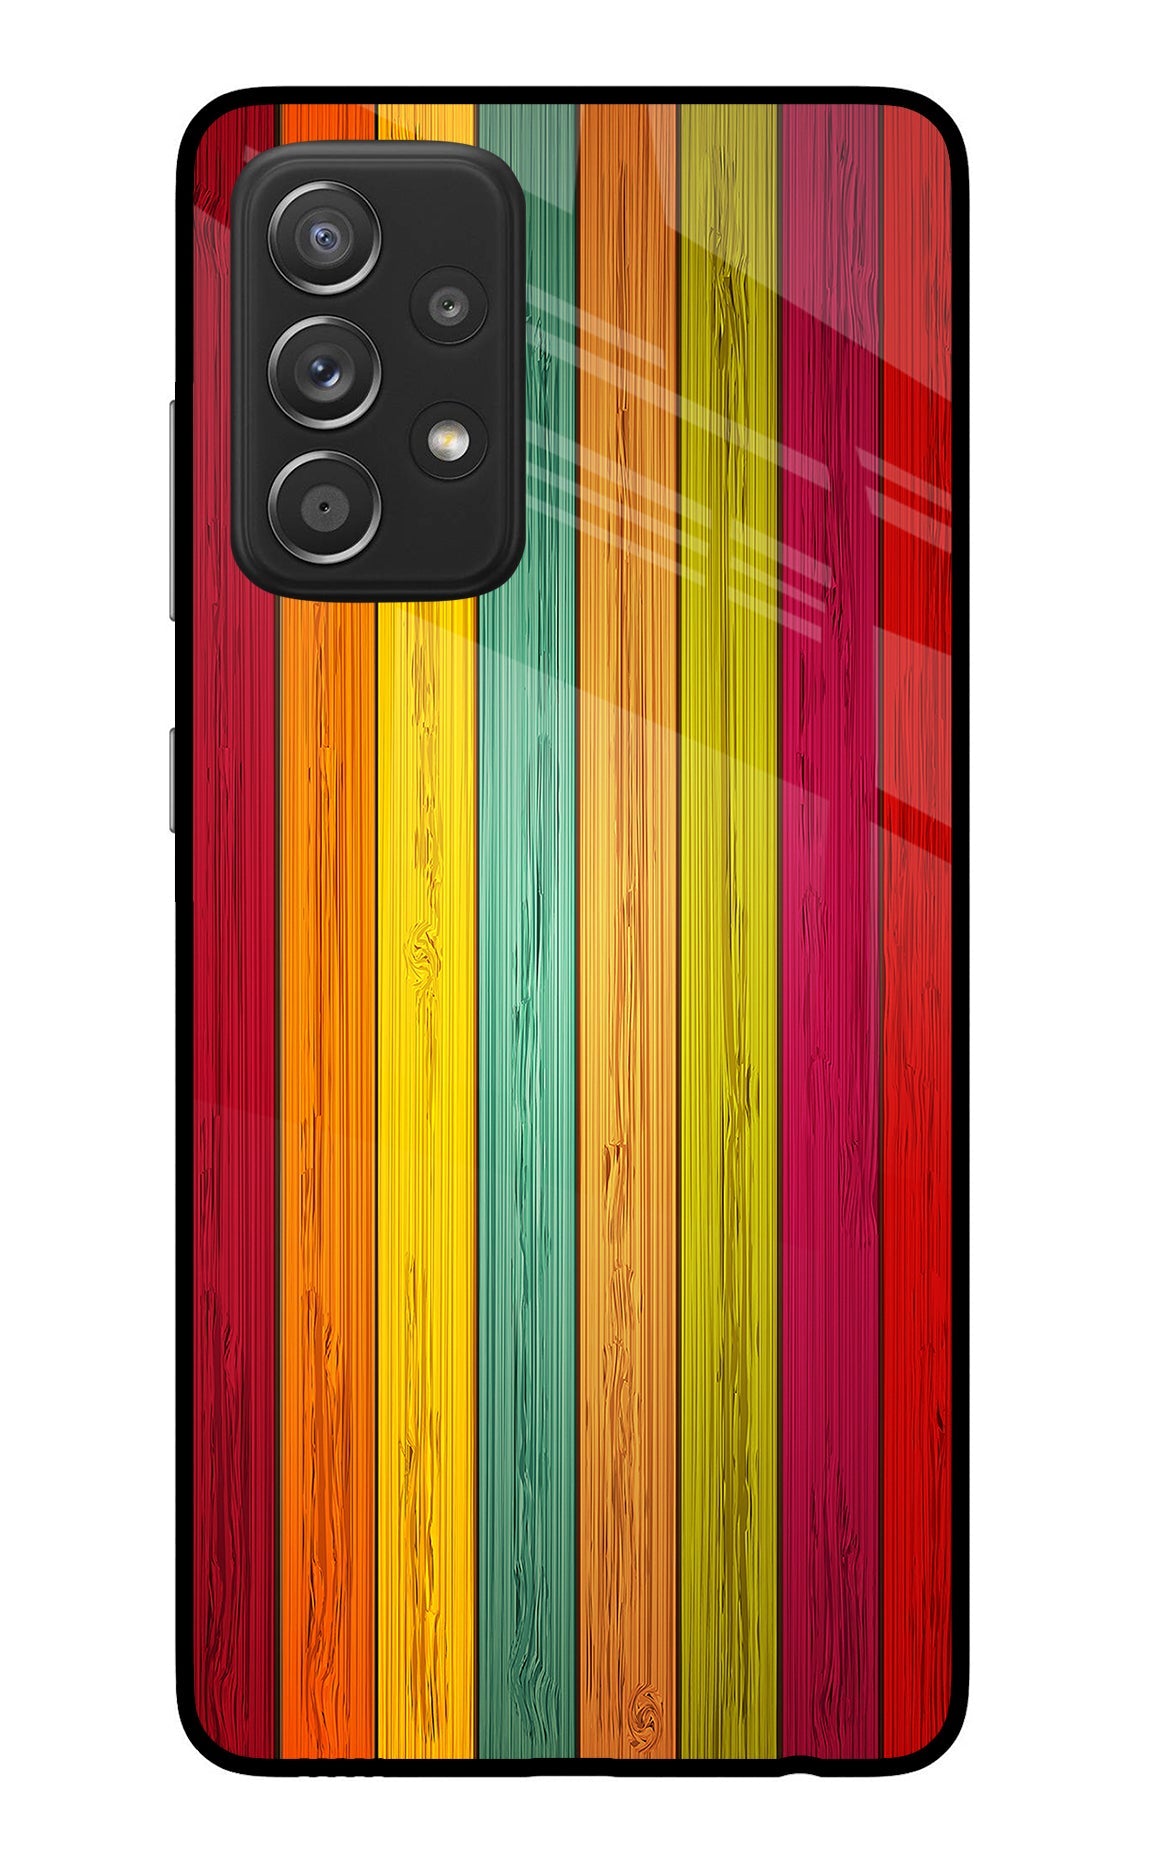 Multicolor Wooden Samsung A52/A52s 5G Back Cover